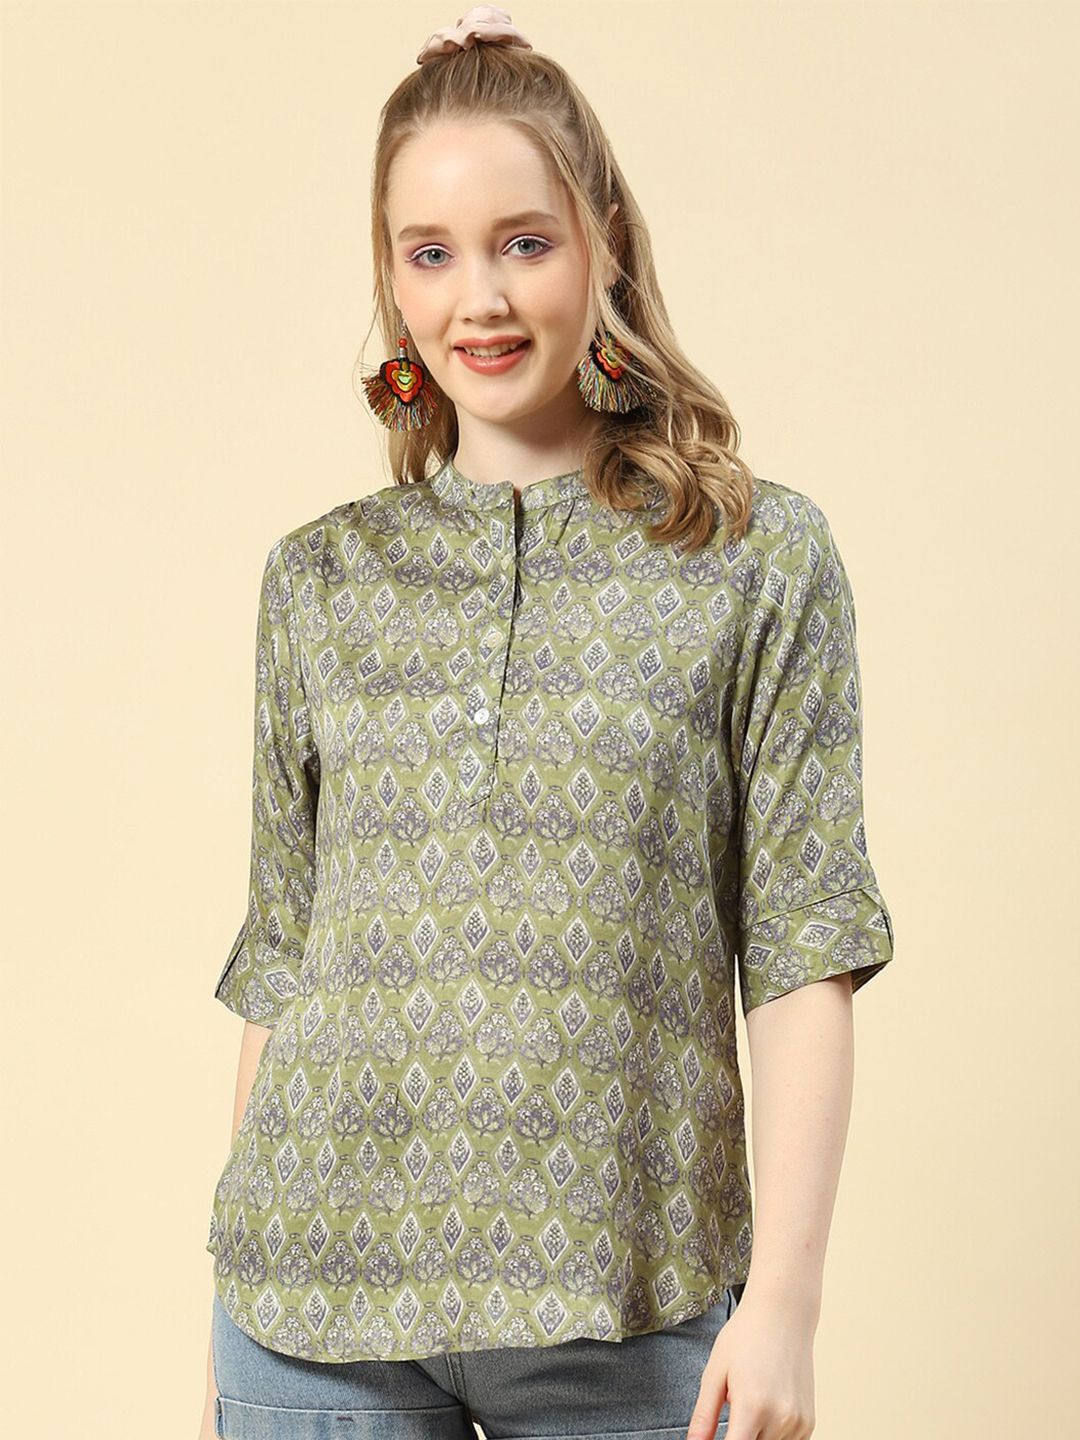 Monte Carlo Green Floral Print Mandarin Collar Roll-Up Sleeves Shirt Style Top Price in India